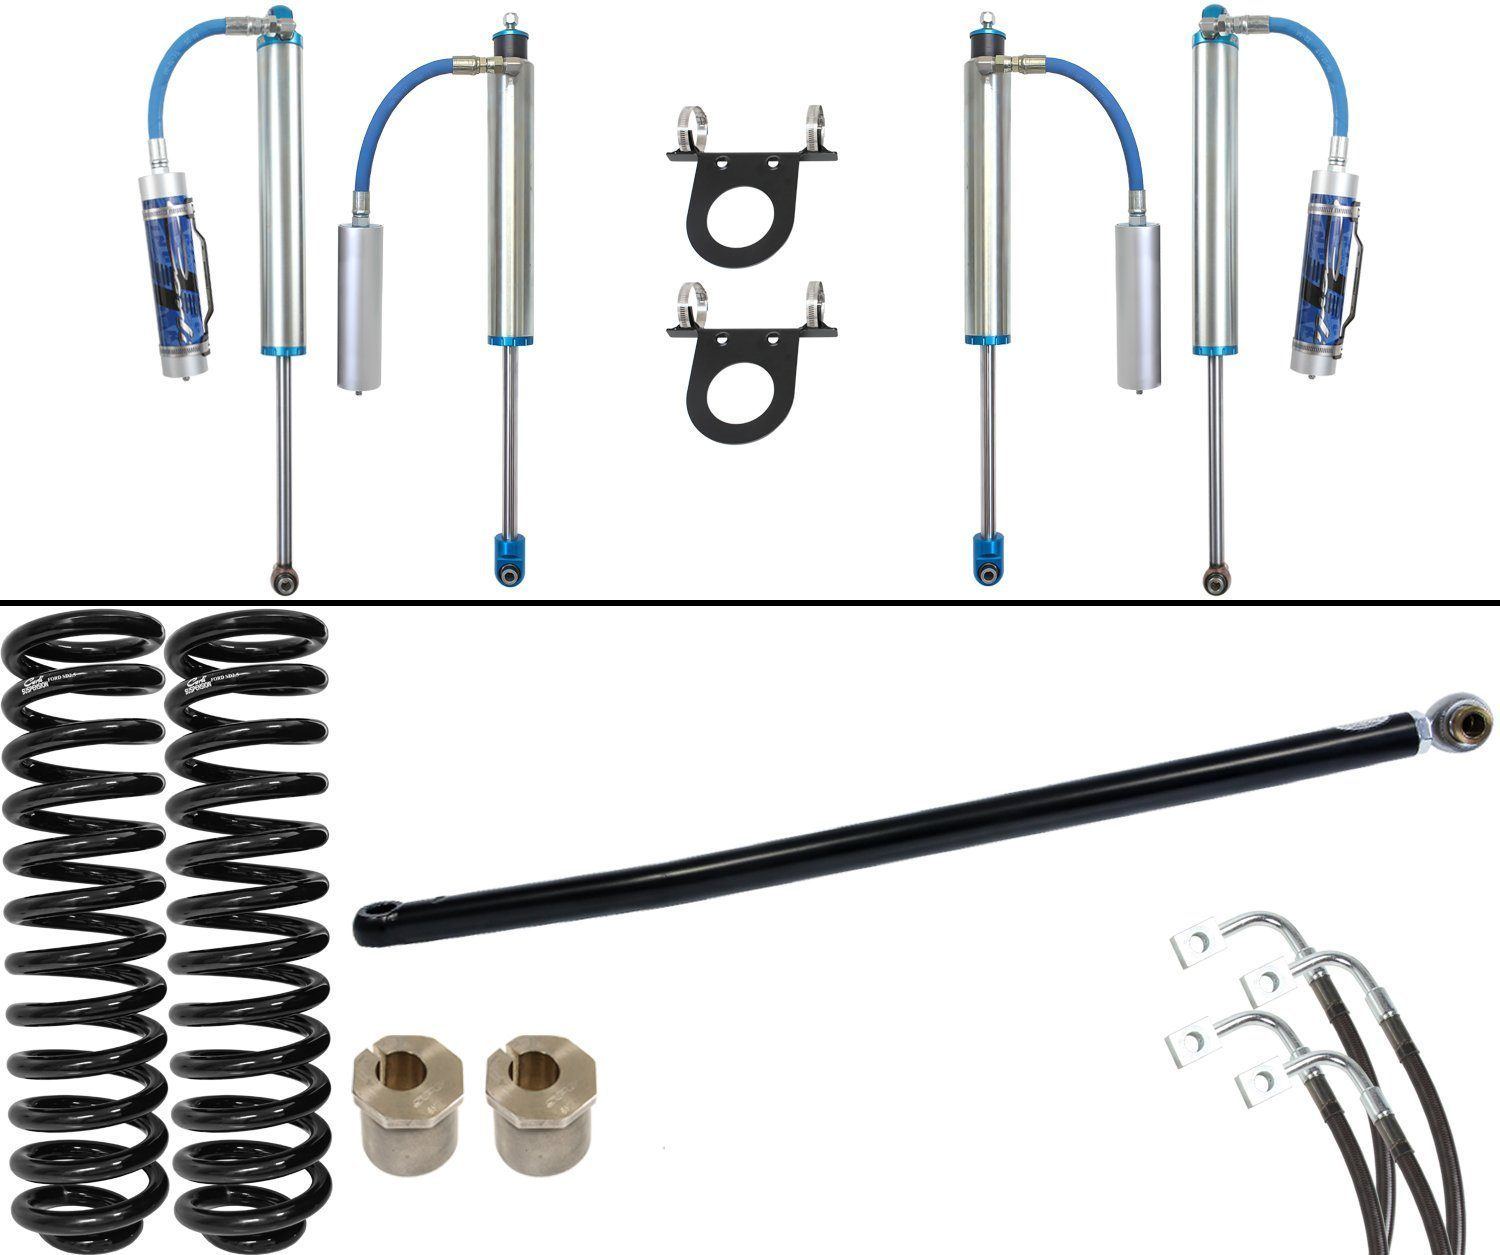 '11-16 Ford F250/350 2.5 Pintop System-2.5" Lift Suspension Carli Suspension parts